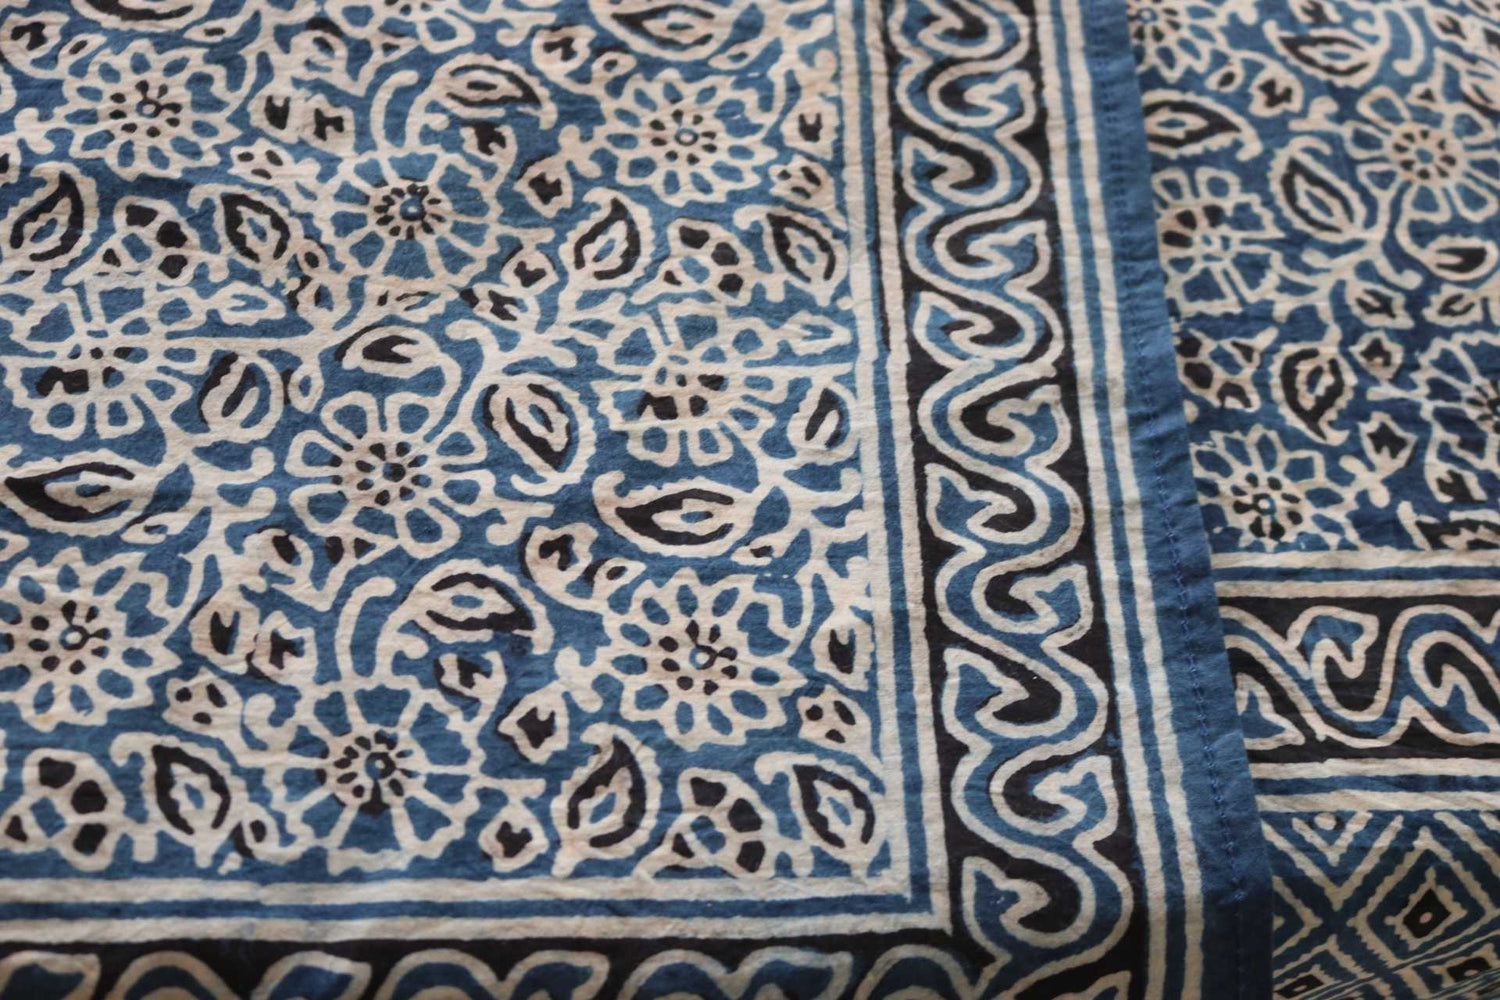 natural dye indigo dye table cloth with hand block print floral motifs by artisans in Pakistan on 100% cotton fabric for large and small tables for festive season